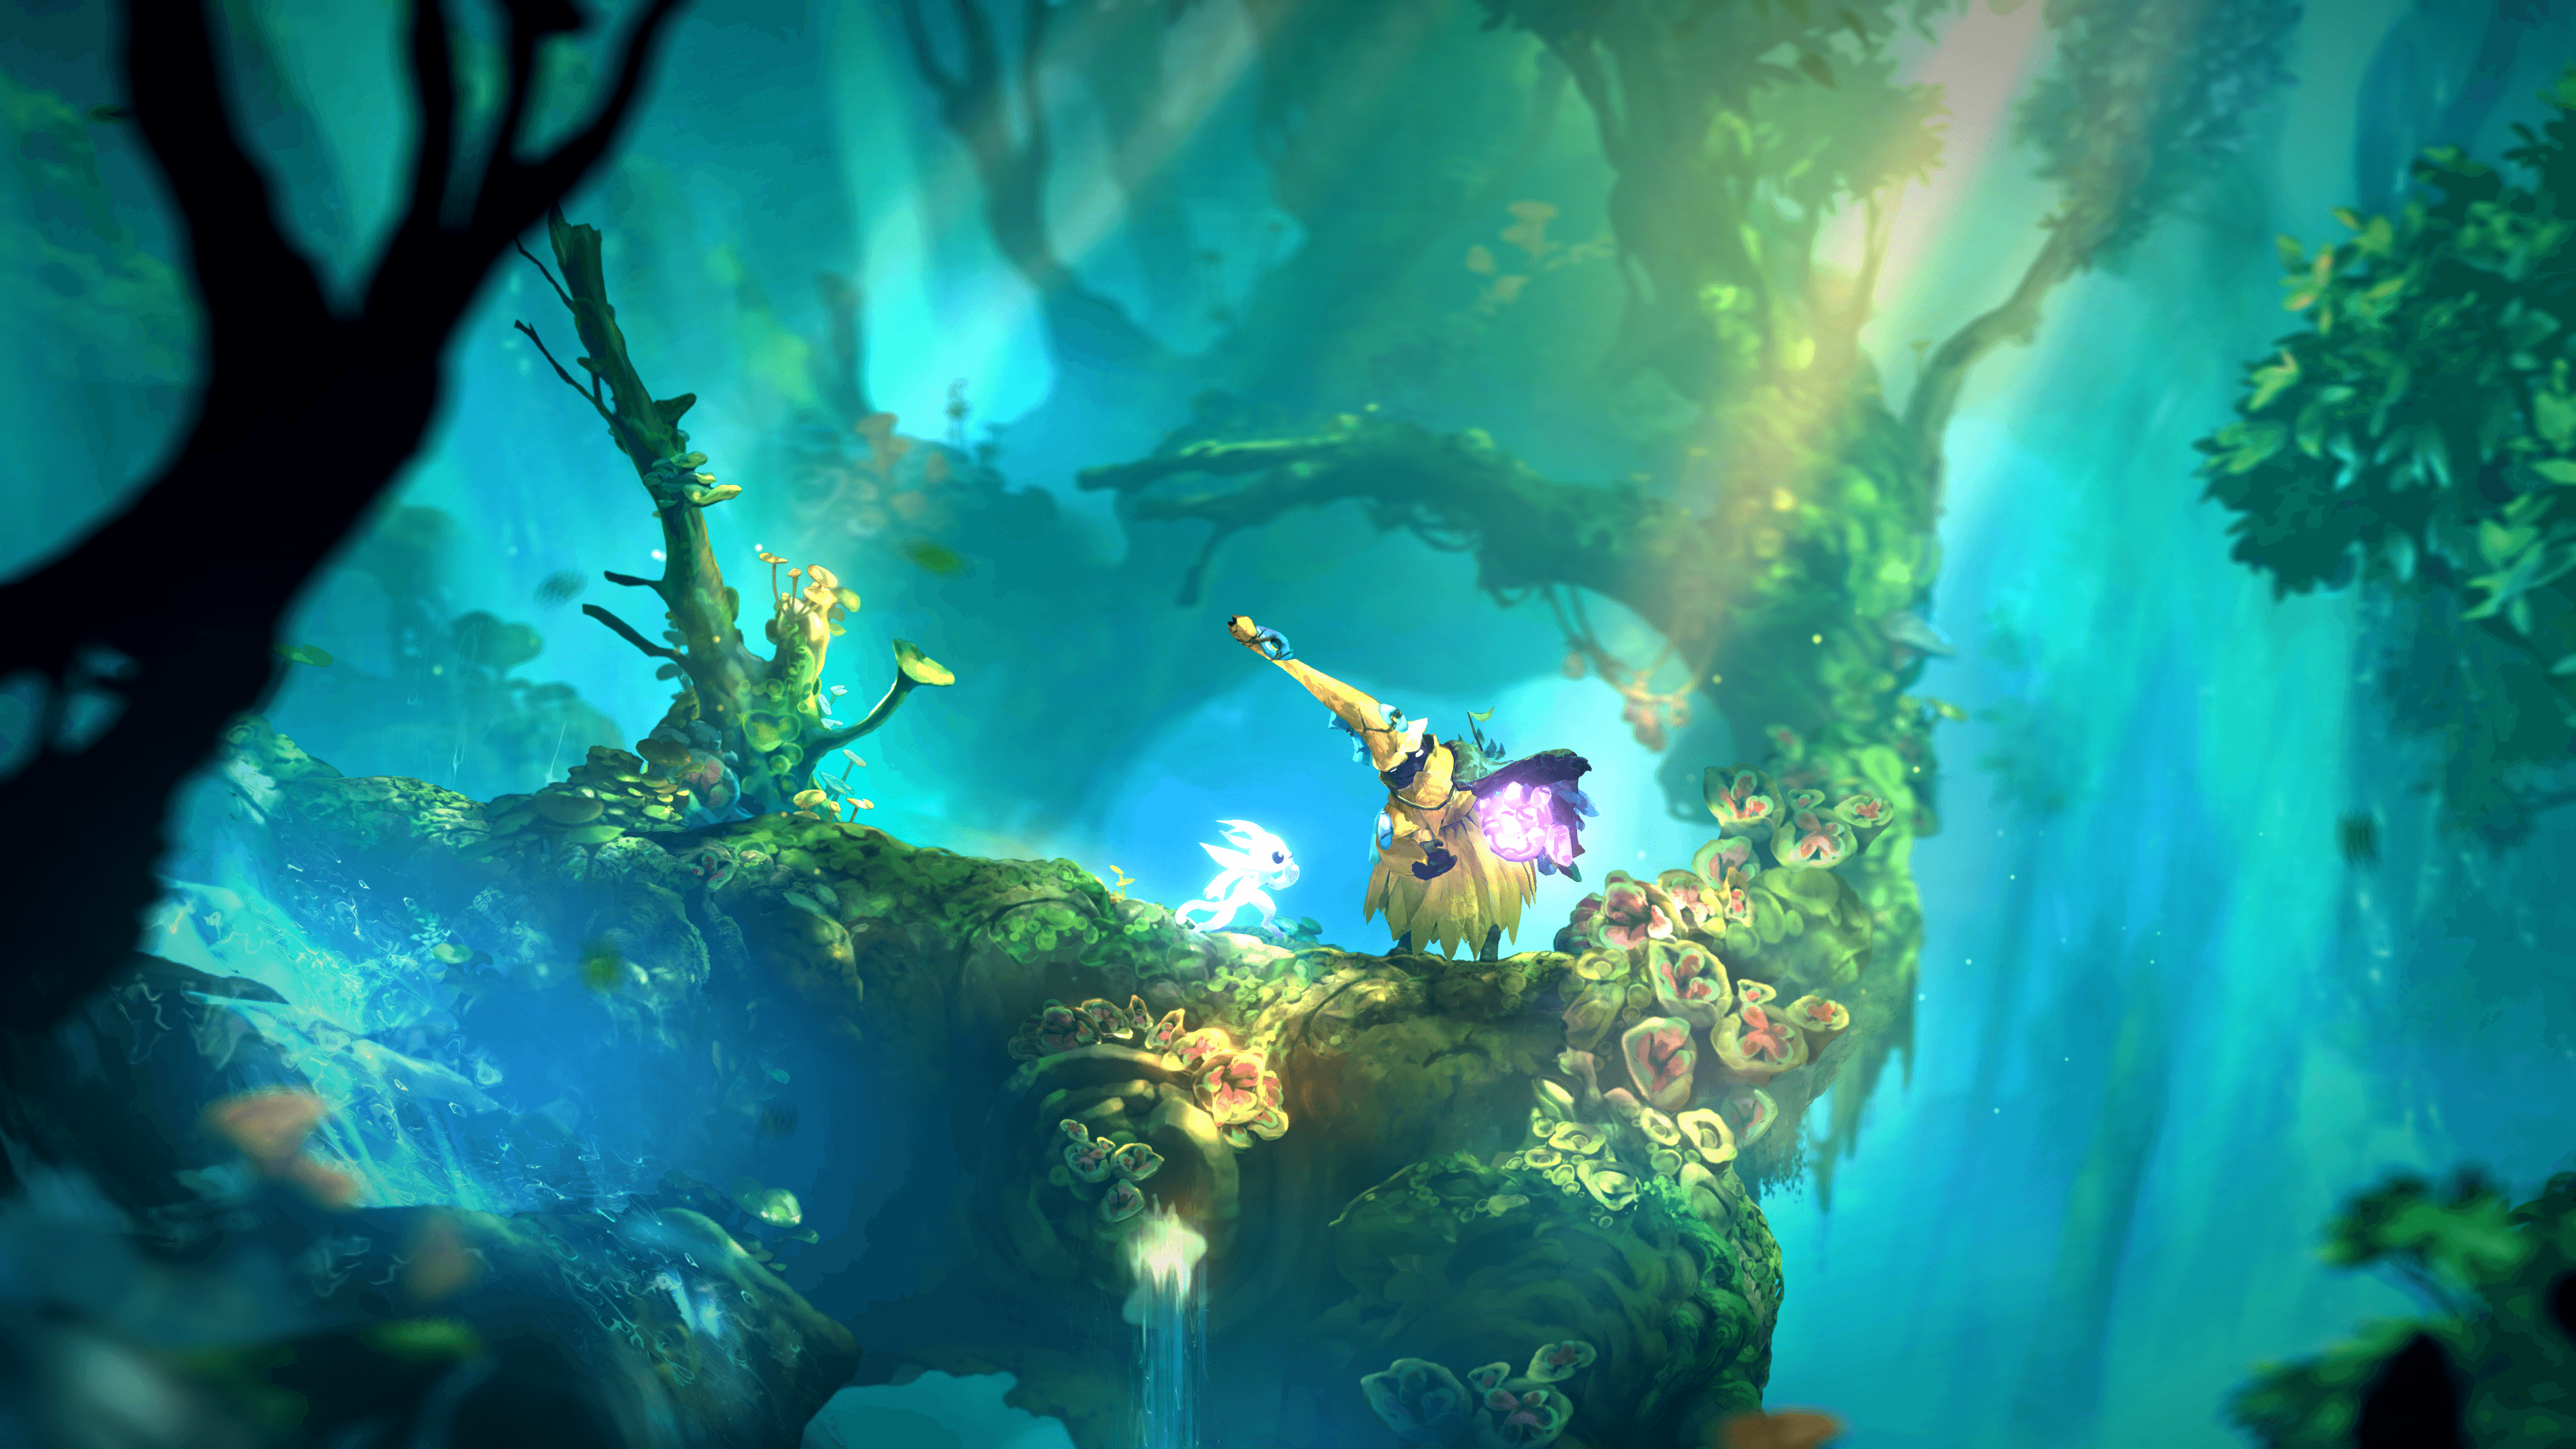 Ori and the Will of the Wisps 4k Ultra HD Wallpaper. Background